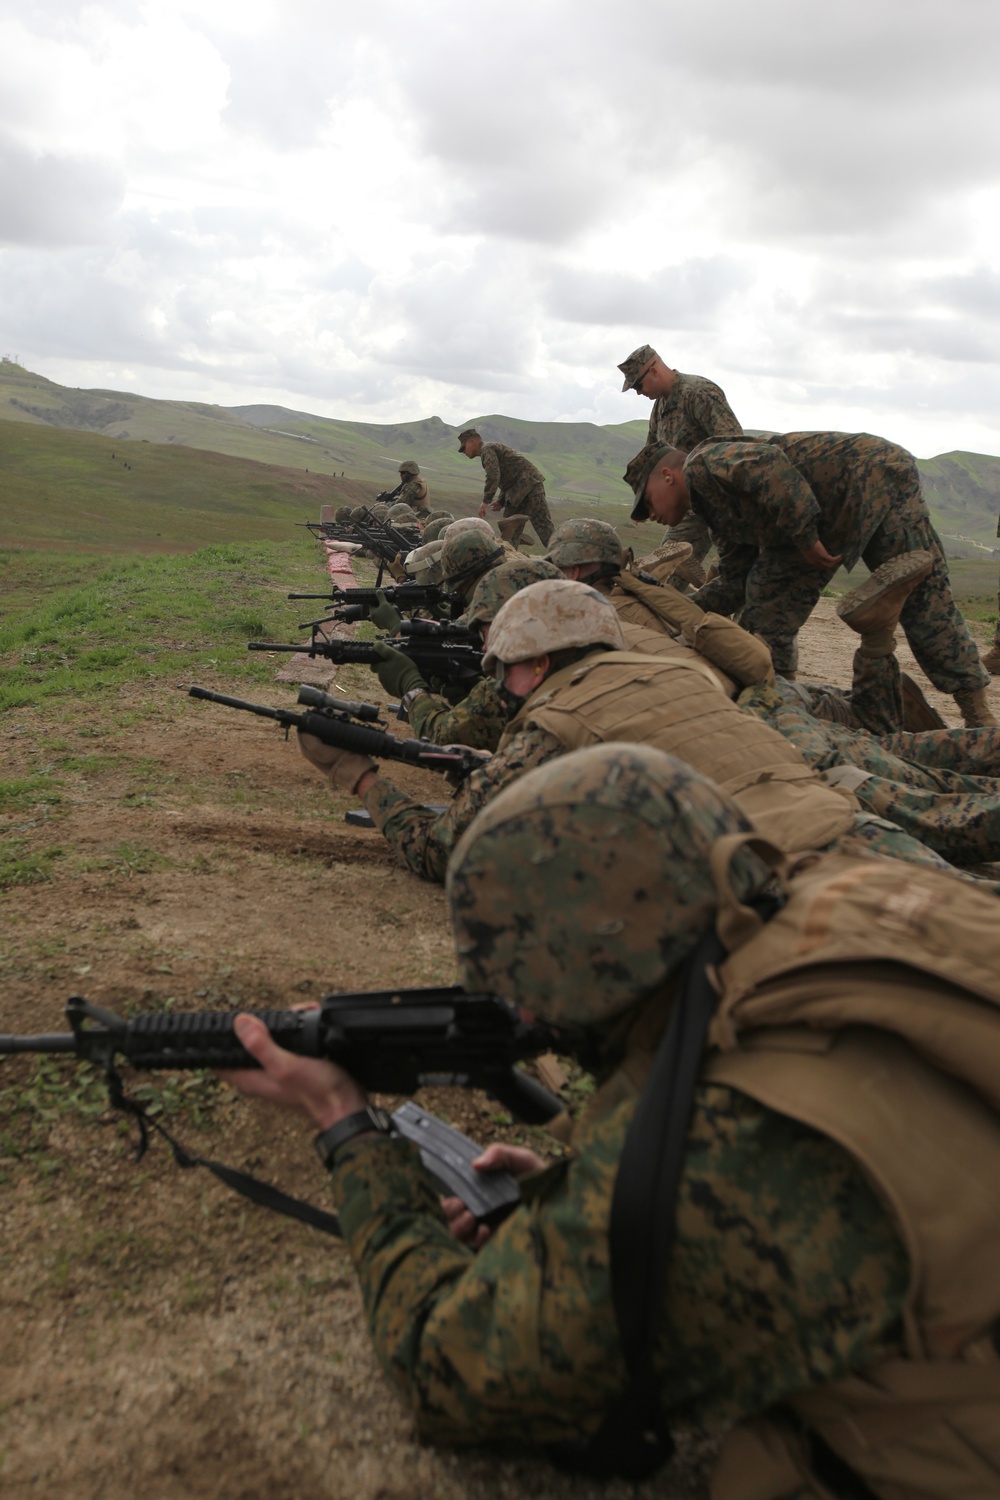 I Marine Expeditionary Force Preps to Take Over Marine Operations in Afghanistan